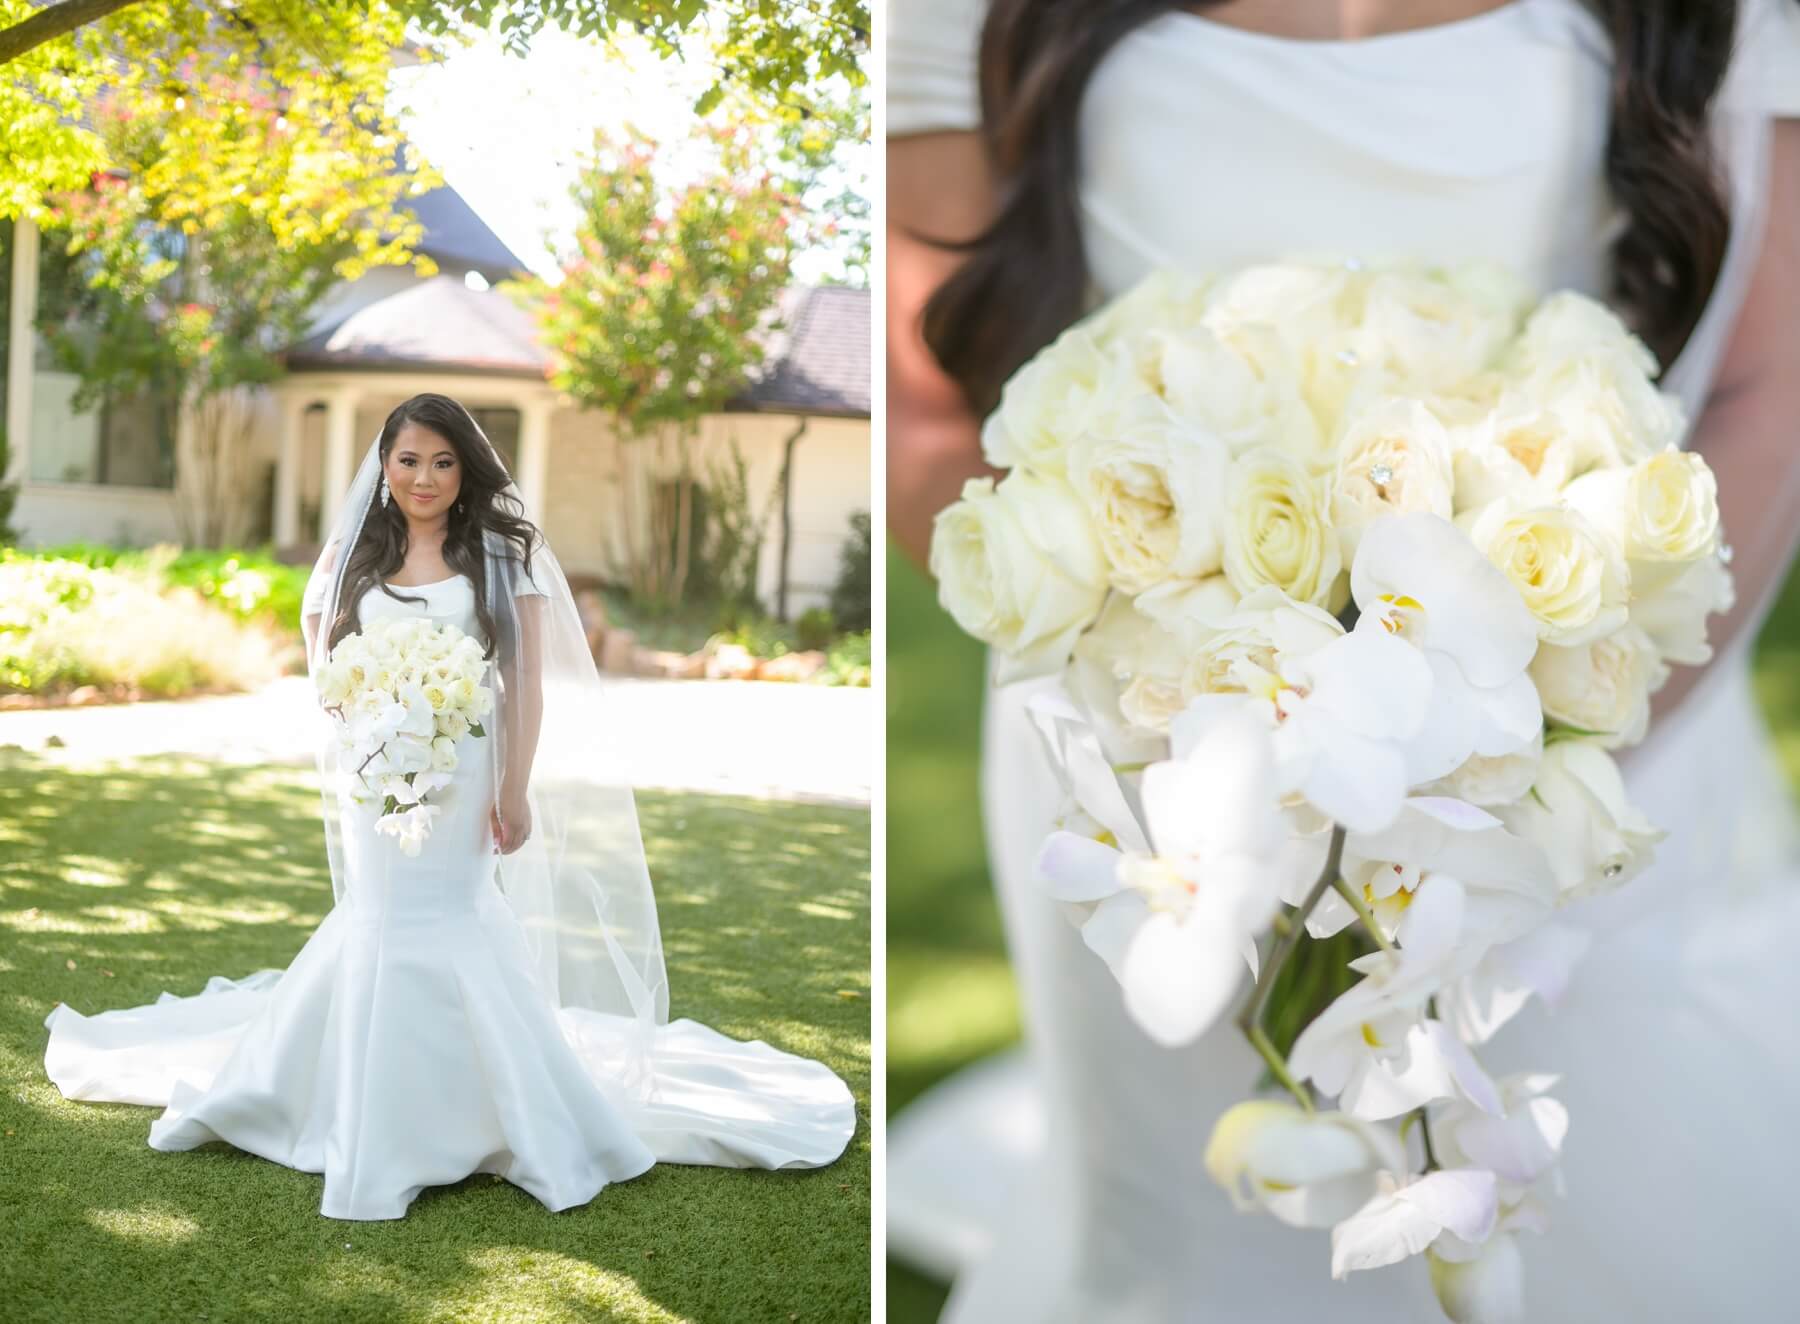 Bride in satin off-the-shoulder gown with bouquet of white roses and orchids